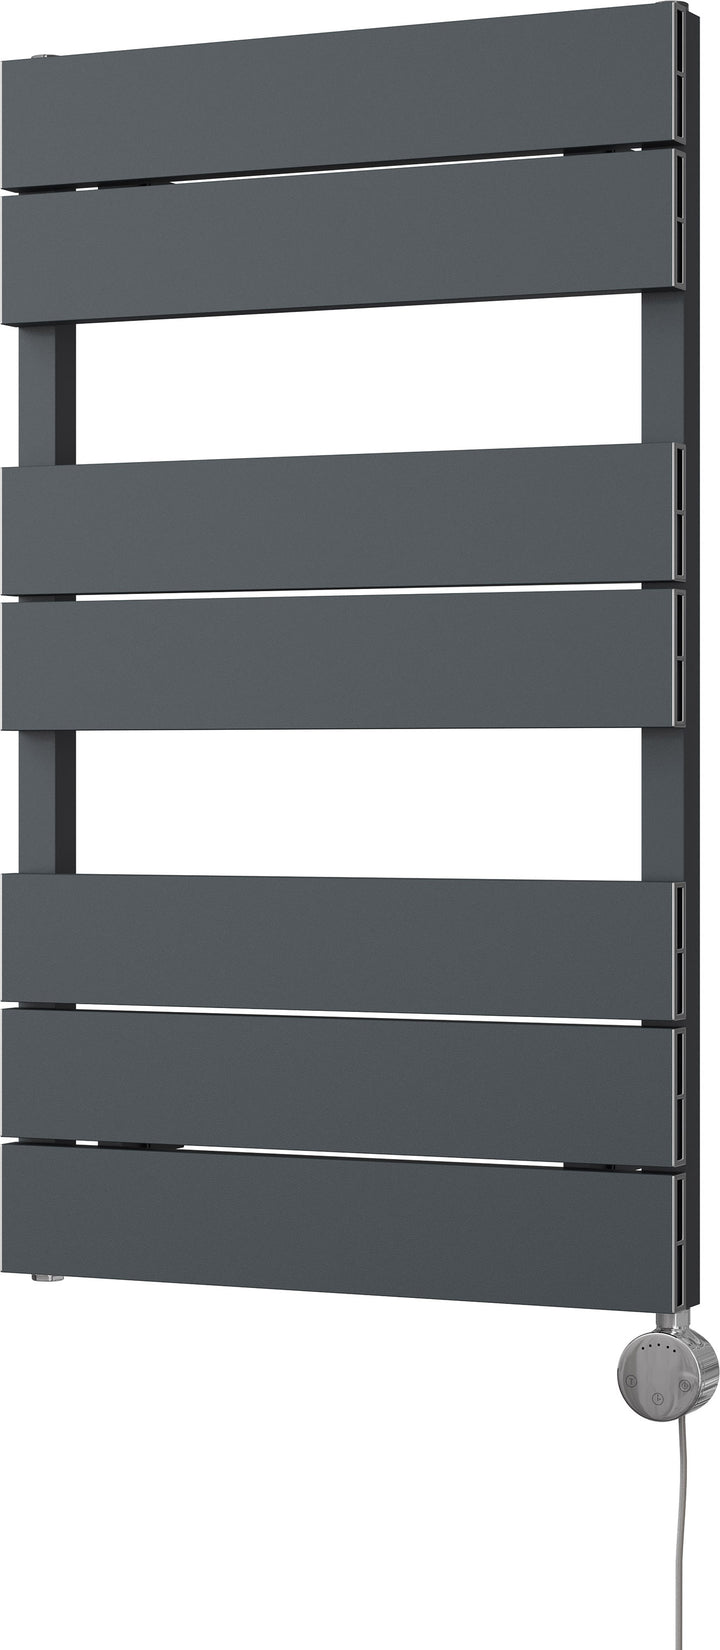 Thetford  - Anthracite Electric Towel Rail H850mm x W500mm 600w Thermostatic